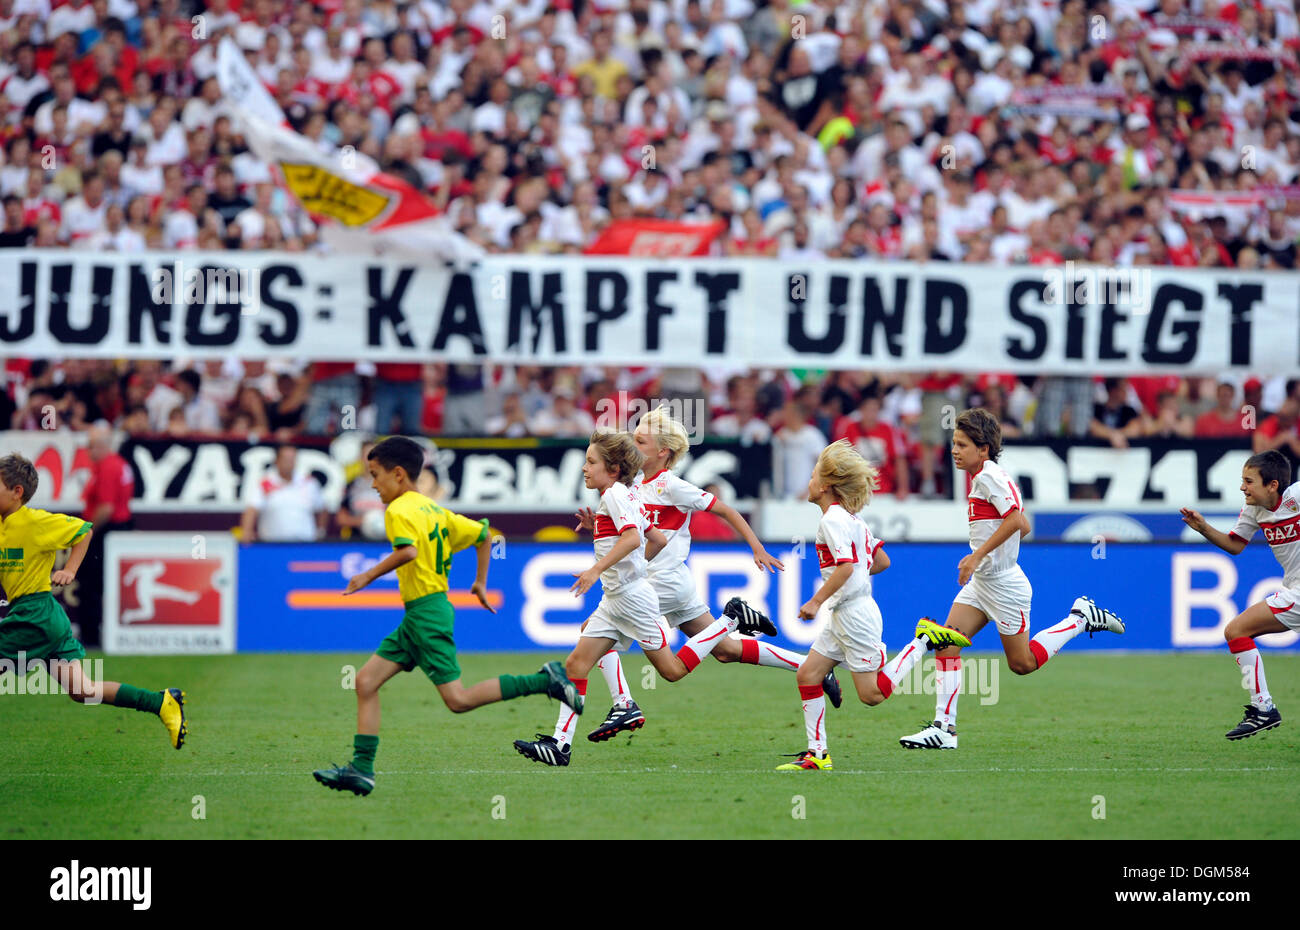 Incoming children in front of a banner, 'Jungs: Kaempft und siegt', German for 'Boys: Fight and win', Mercedes-Benz Arena Stock Photo